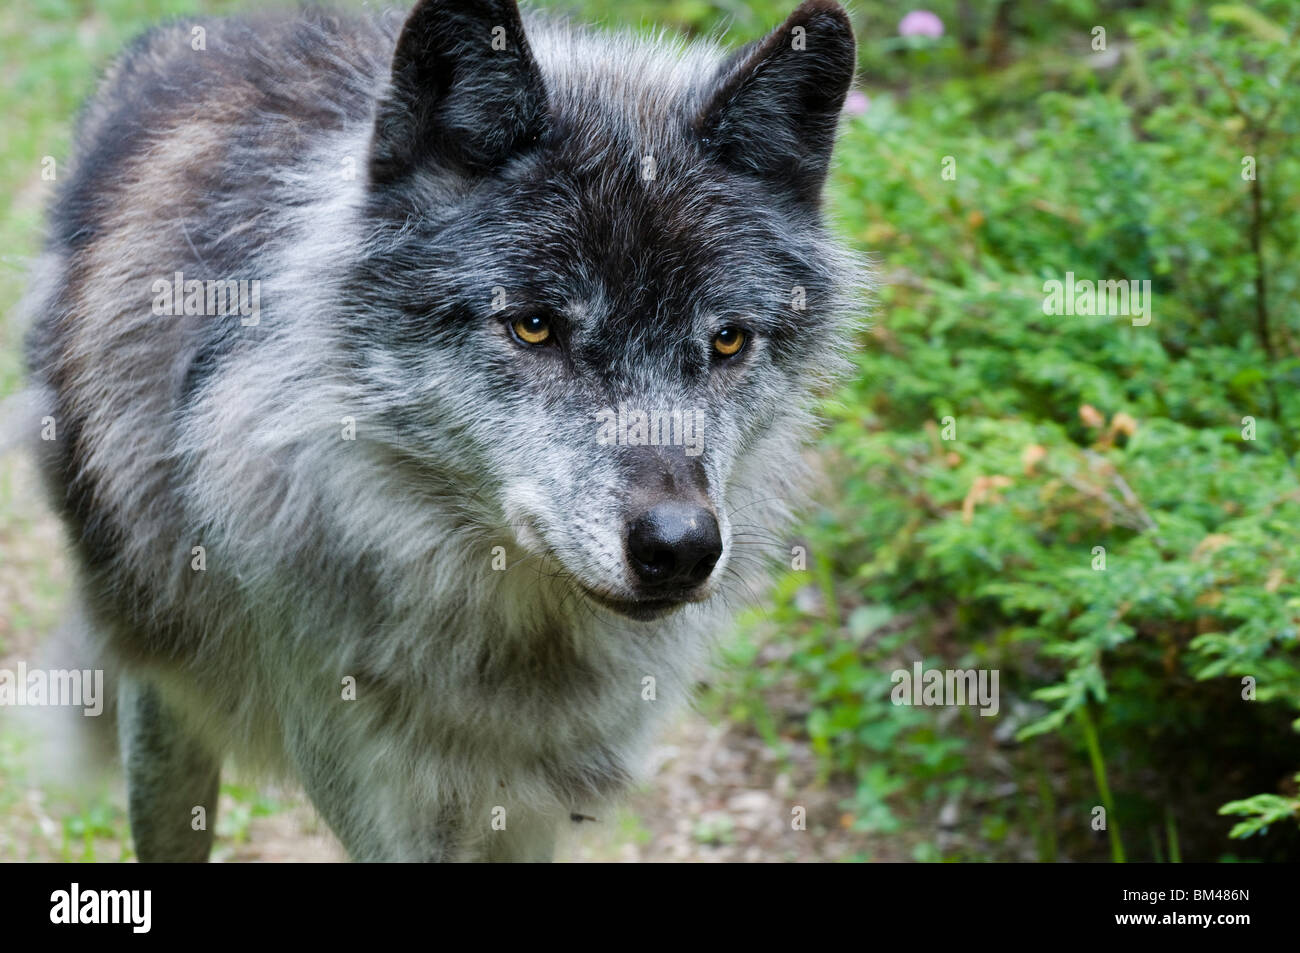 a rare black wolf approaches, curious about whit lies ahead. Stock Photo